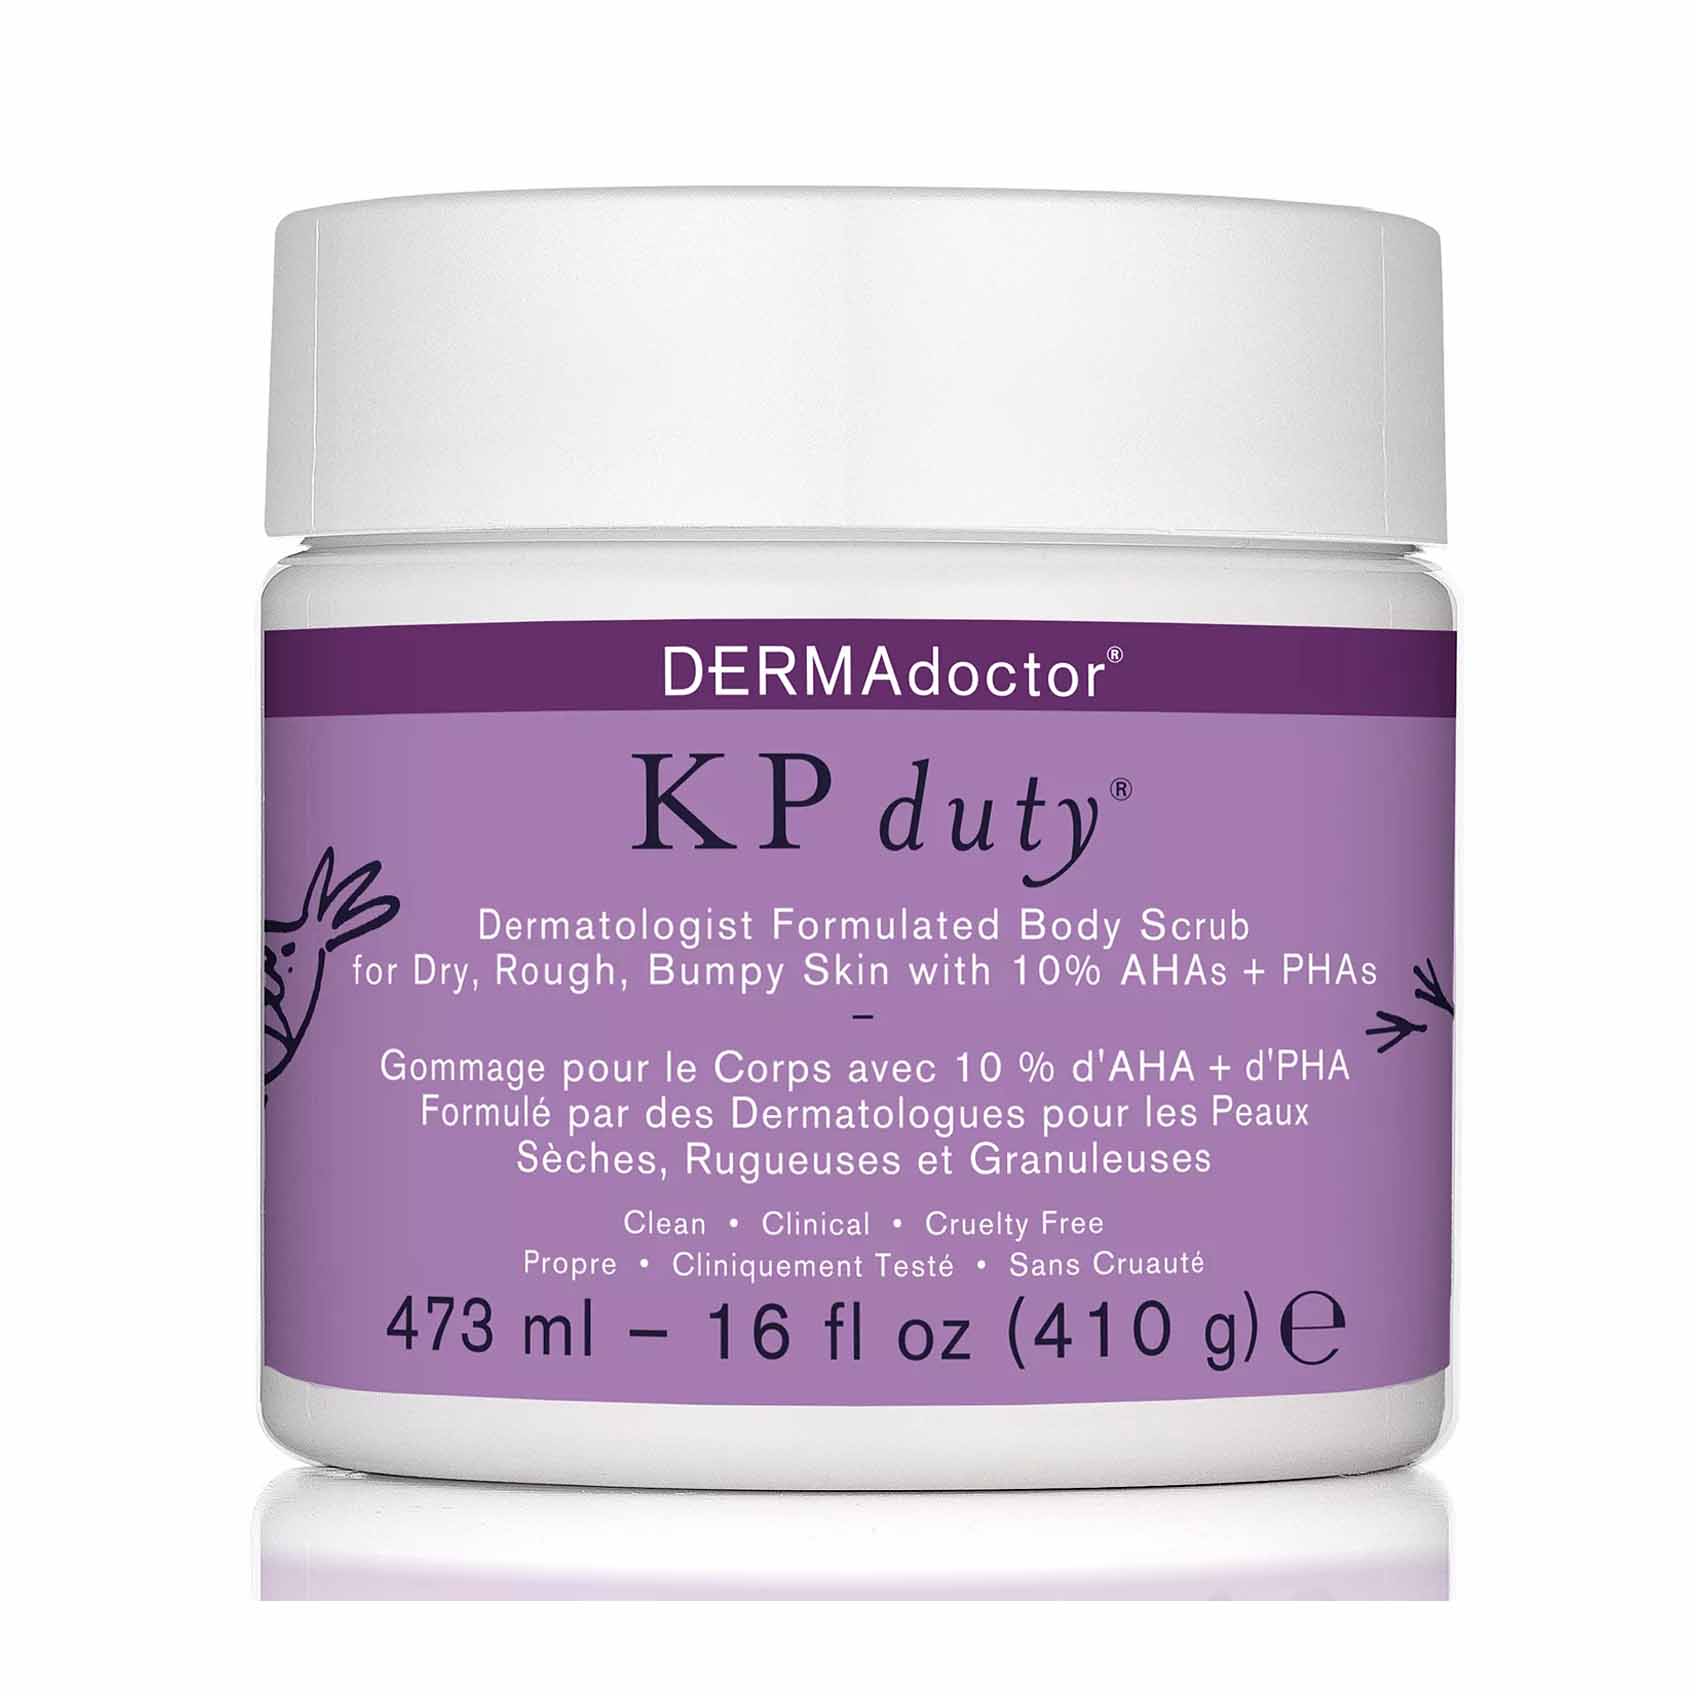 KP Duty Dermatologist Formulated Body Scrub For Dry, Rough, Bumpy Skin in purple and white tub